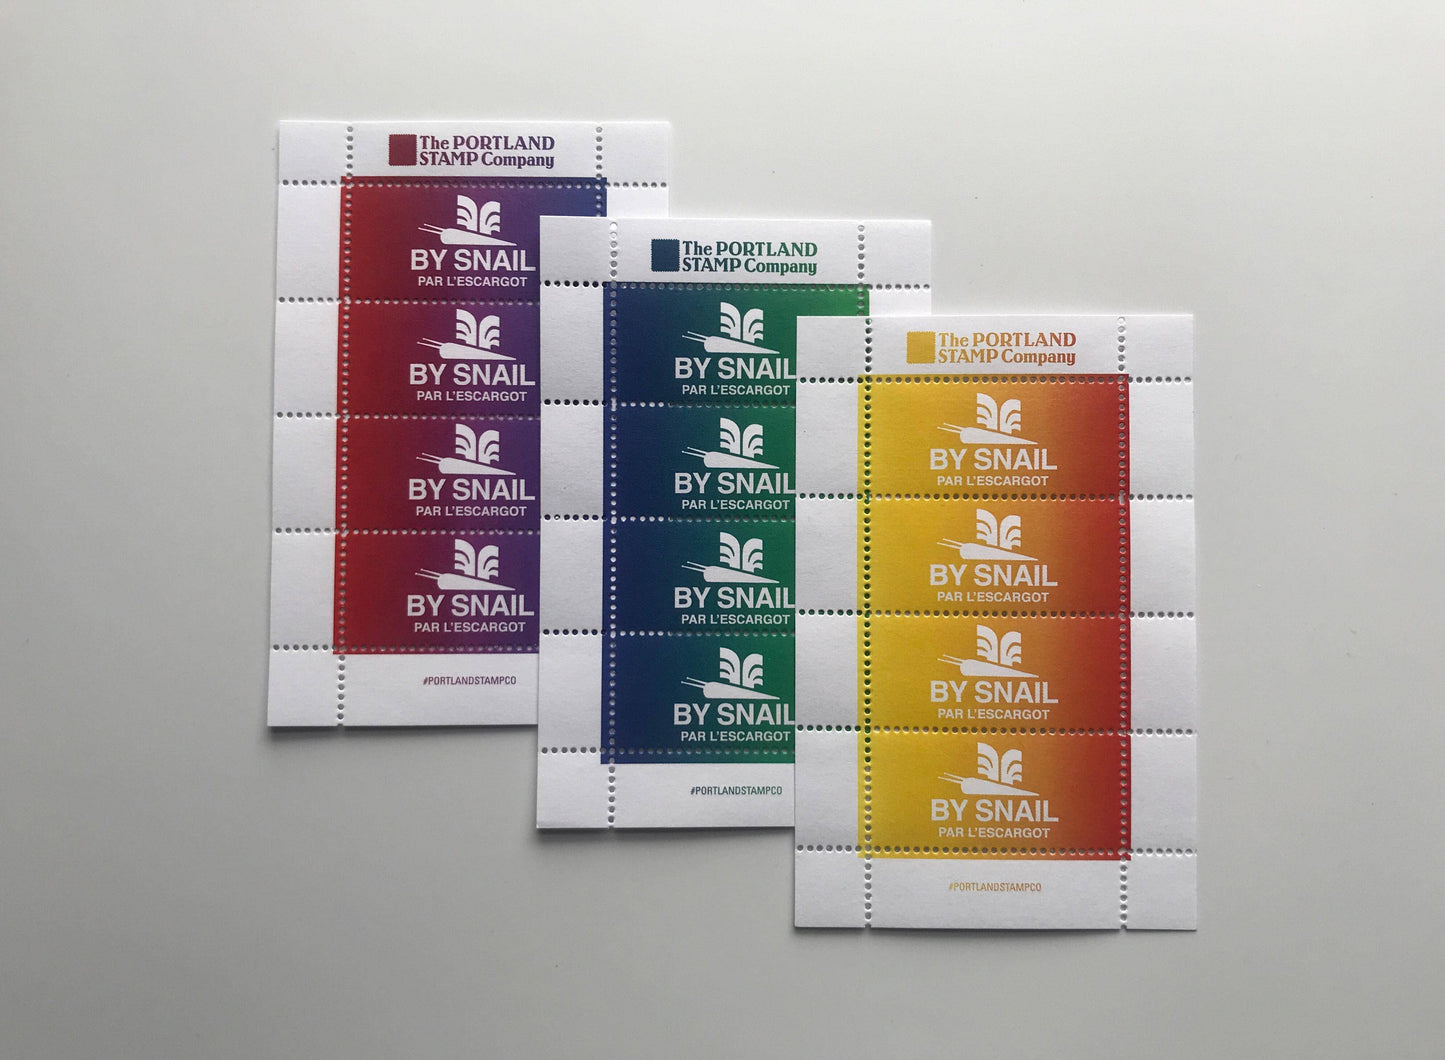 The Portland Stamp Company - By Snail Lick & Stick Stamps - 3-pack (gradients)